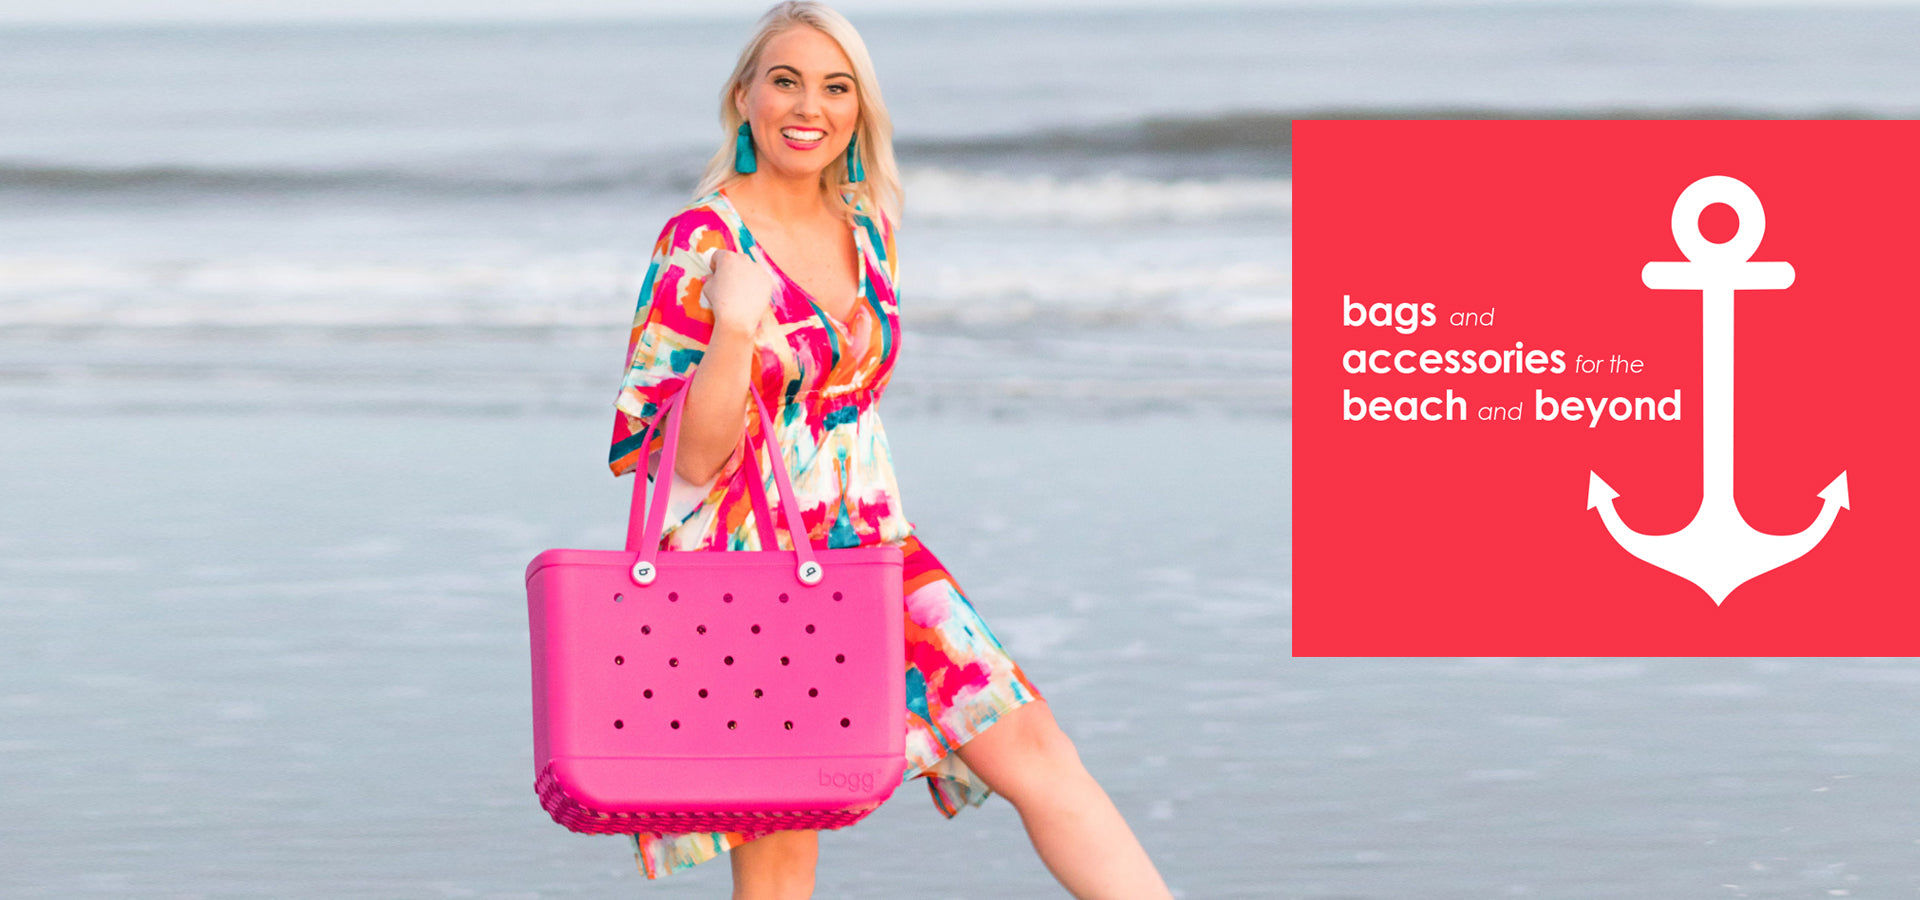 Grab a bogg bag in EVERY color online or in store💖🥰 #boggbag #boggs